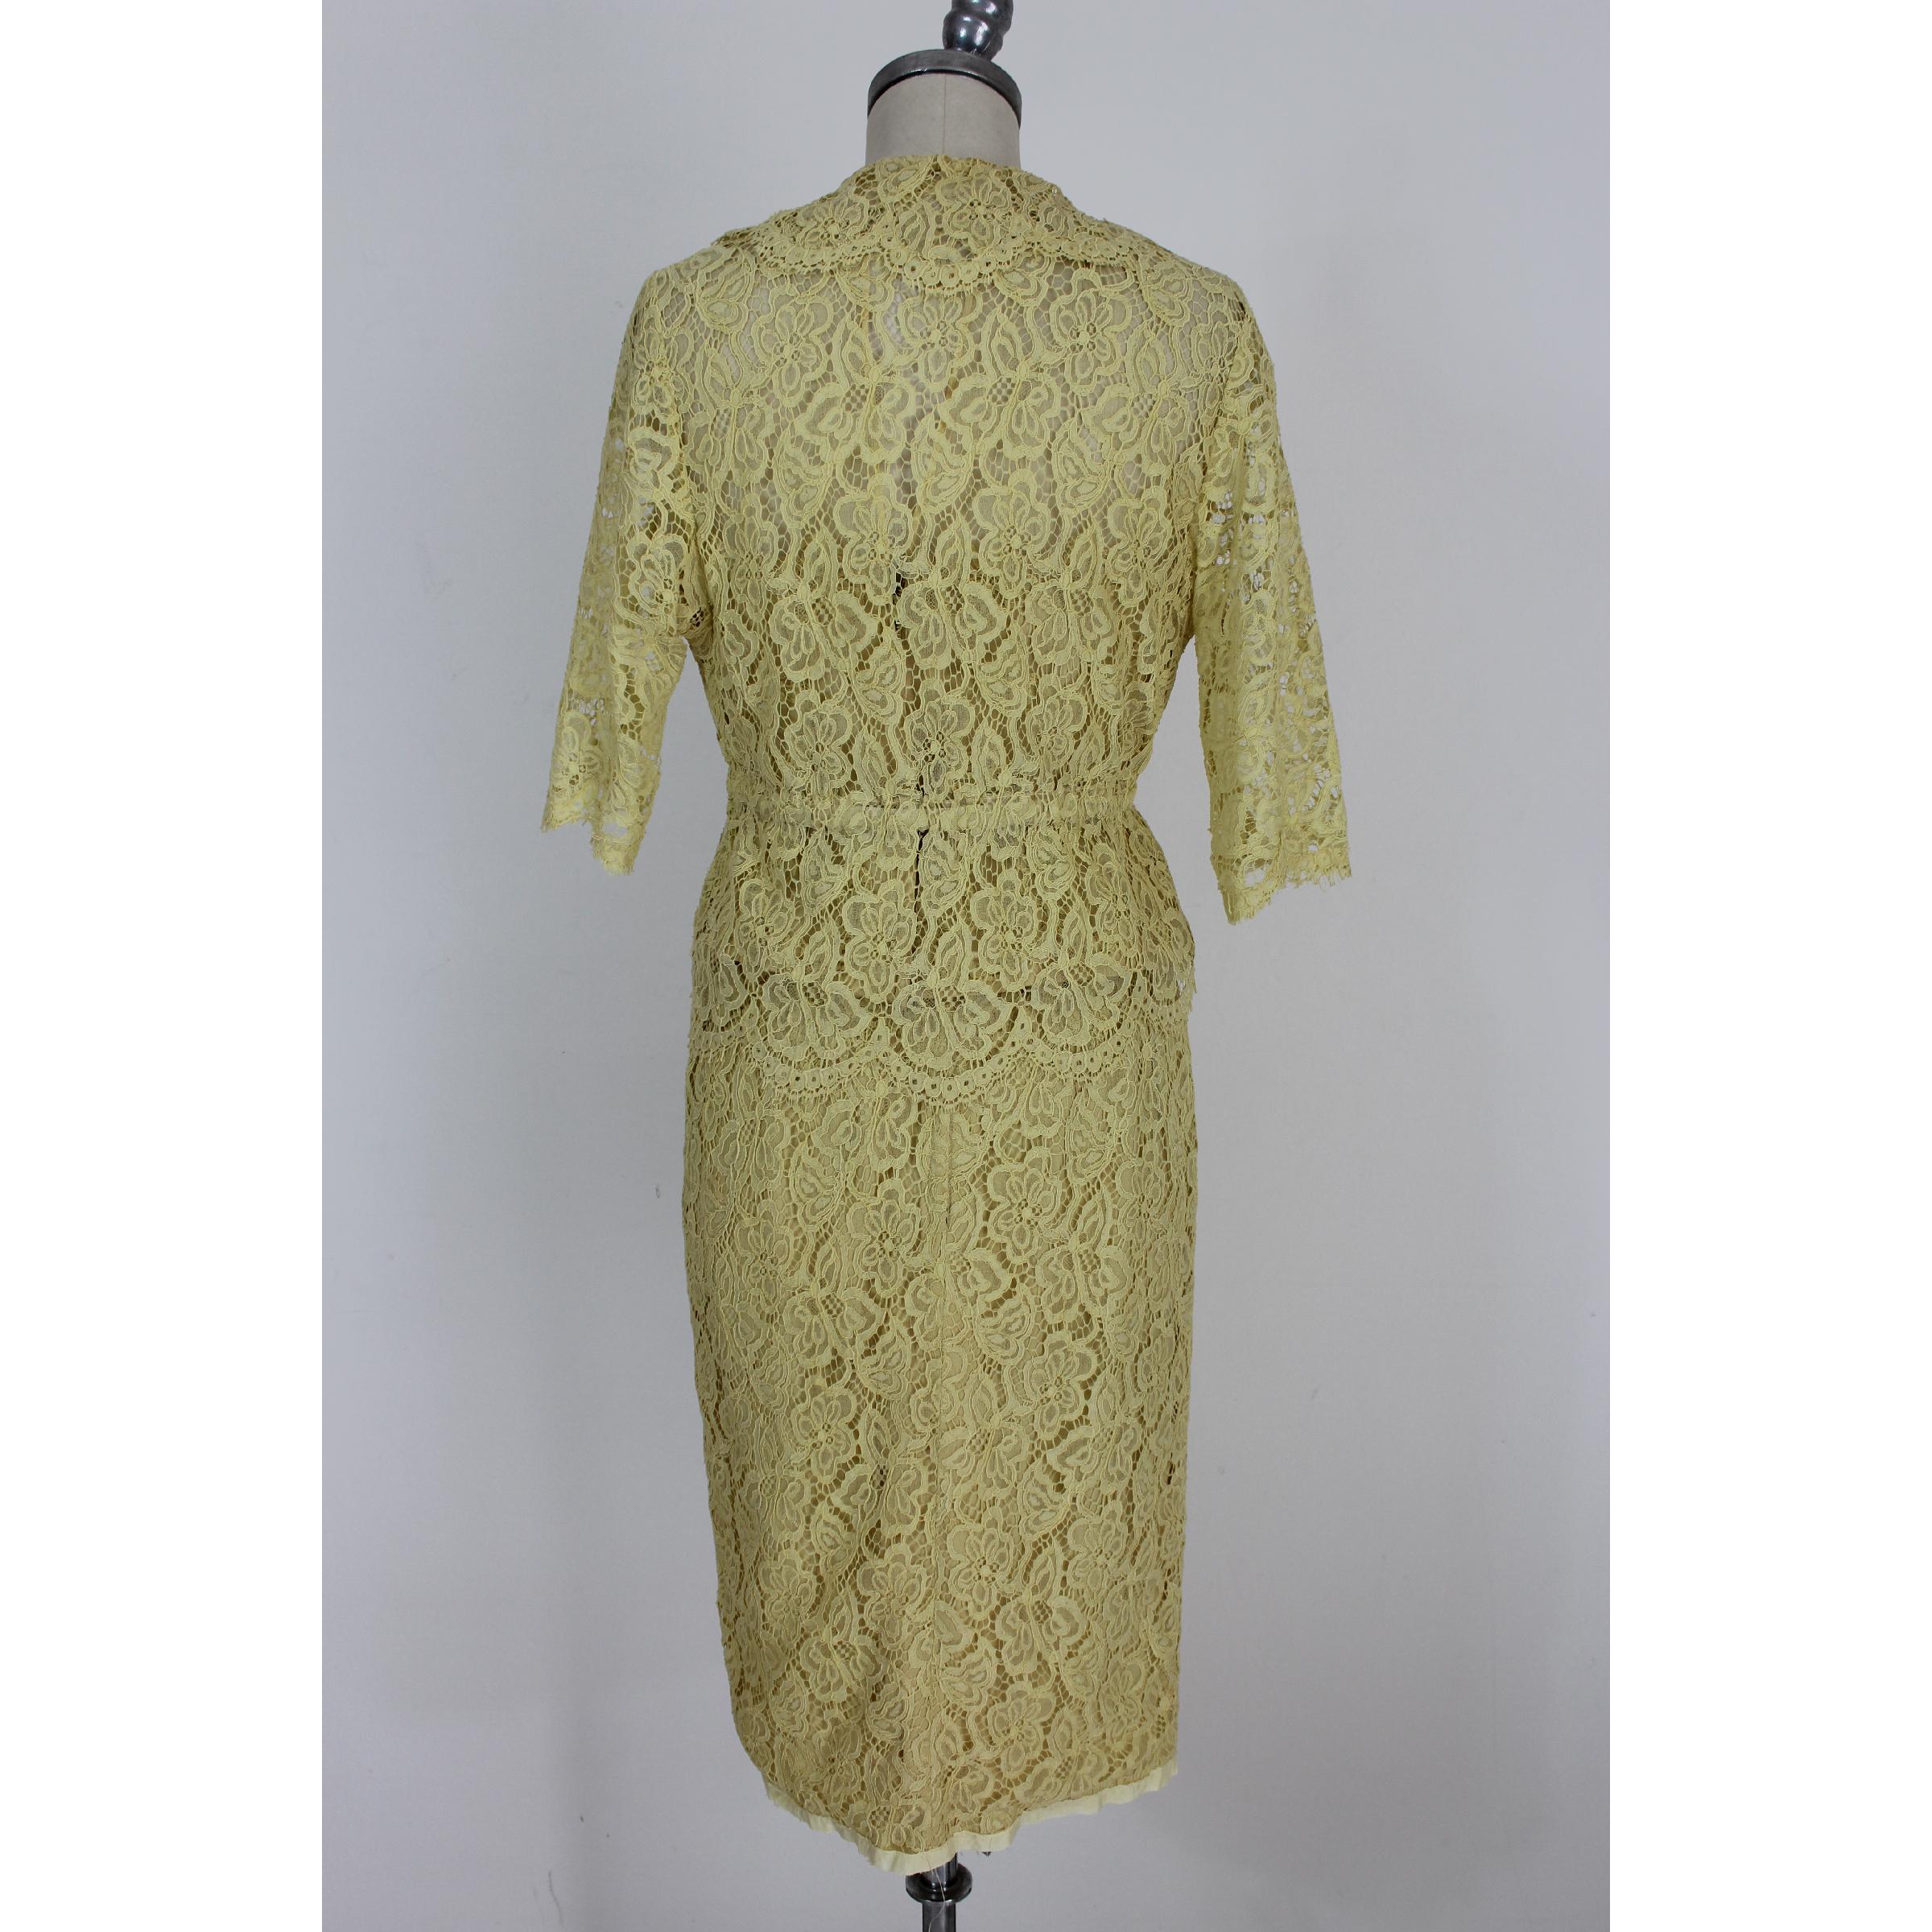 Vintage dress 60s, signed Mignon, with the label of the famous Atlantic City store, the Needle Craft. Suit in lace and yellow silk. Short jacket in transparent color with clip closure. Silk and lace top with transparencies. Sheath skirt lined in